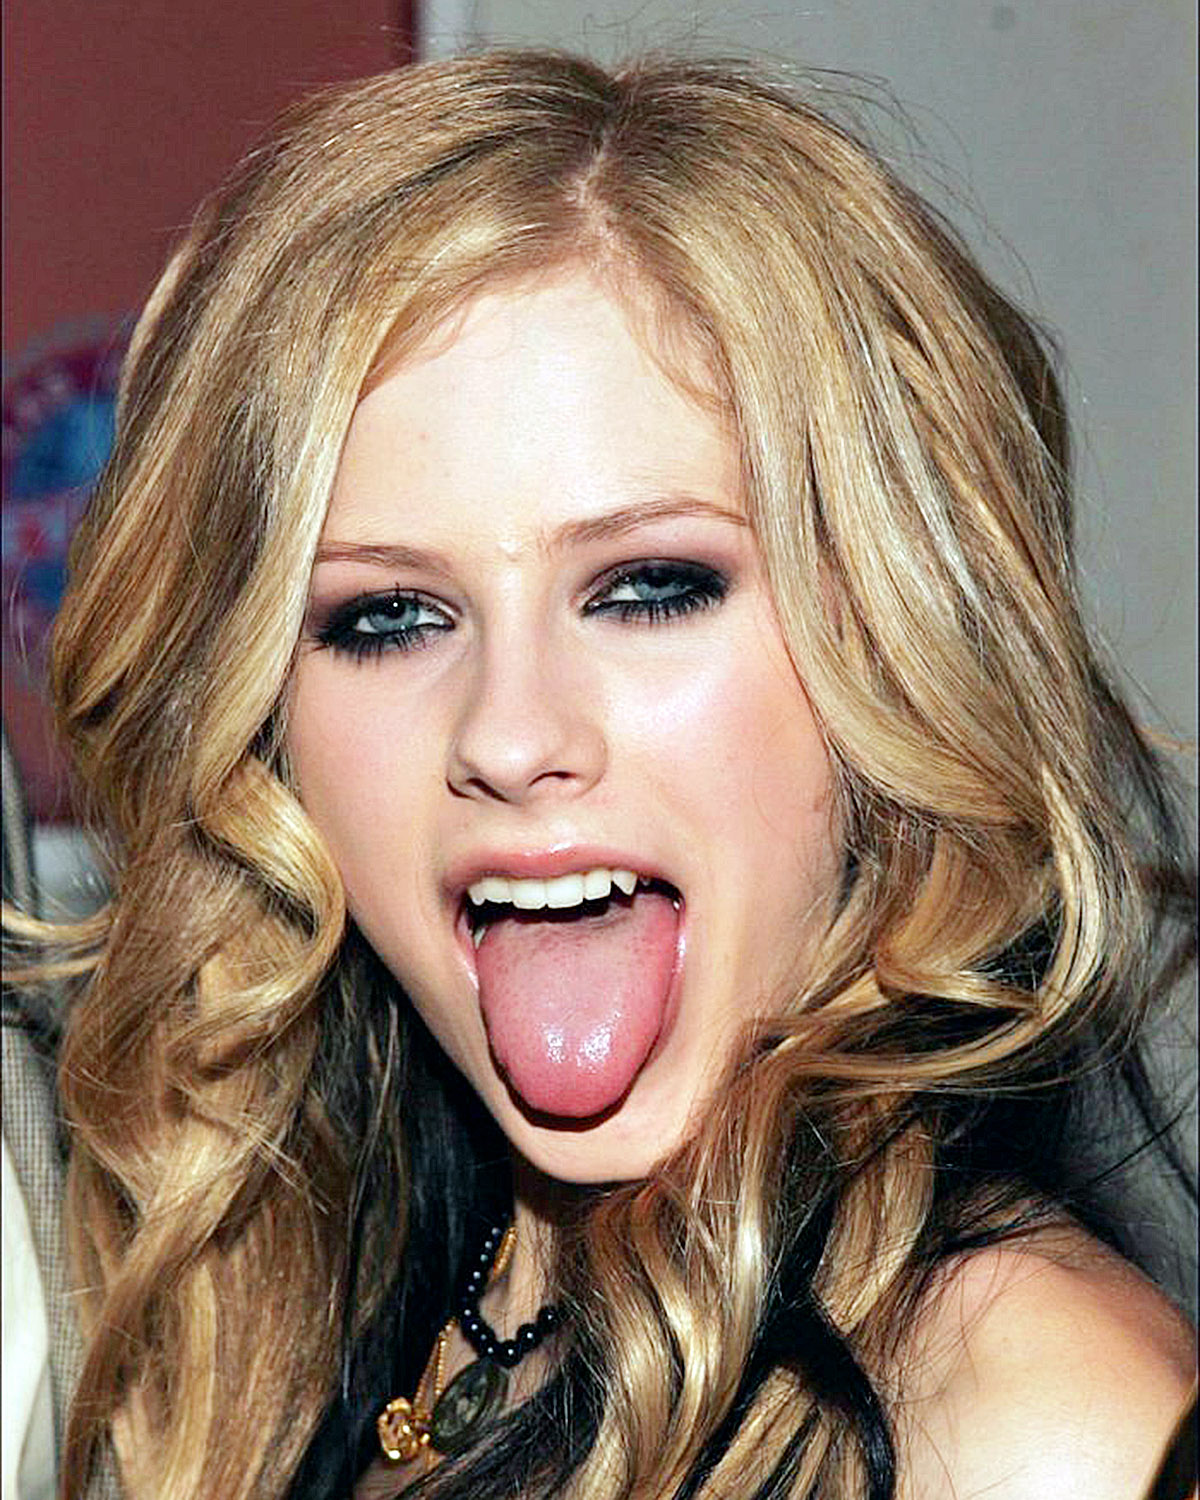 Celebrities sticking their tongue out.